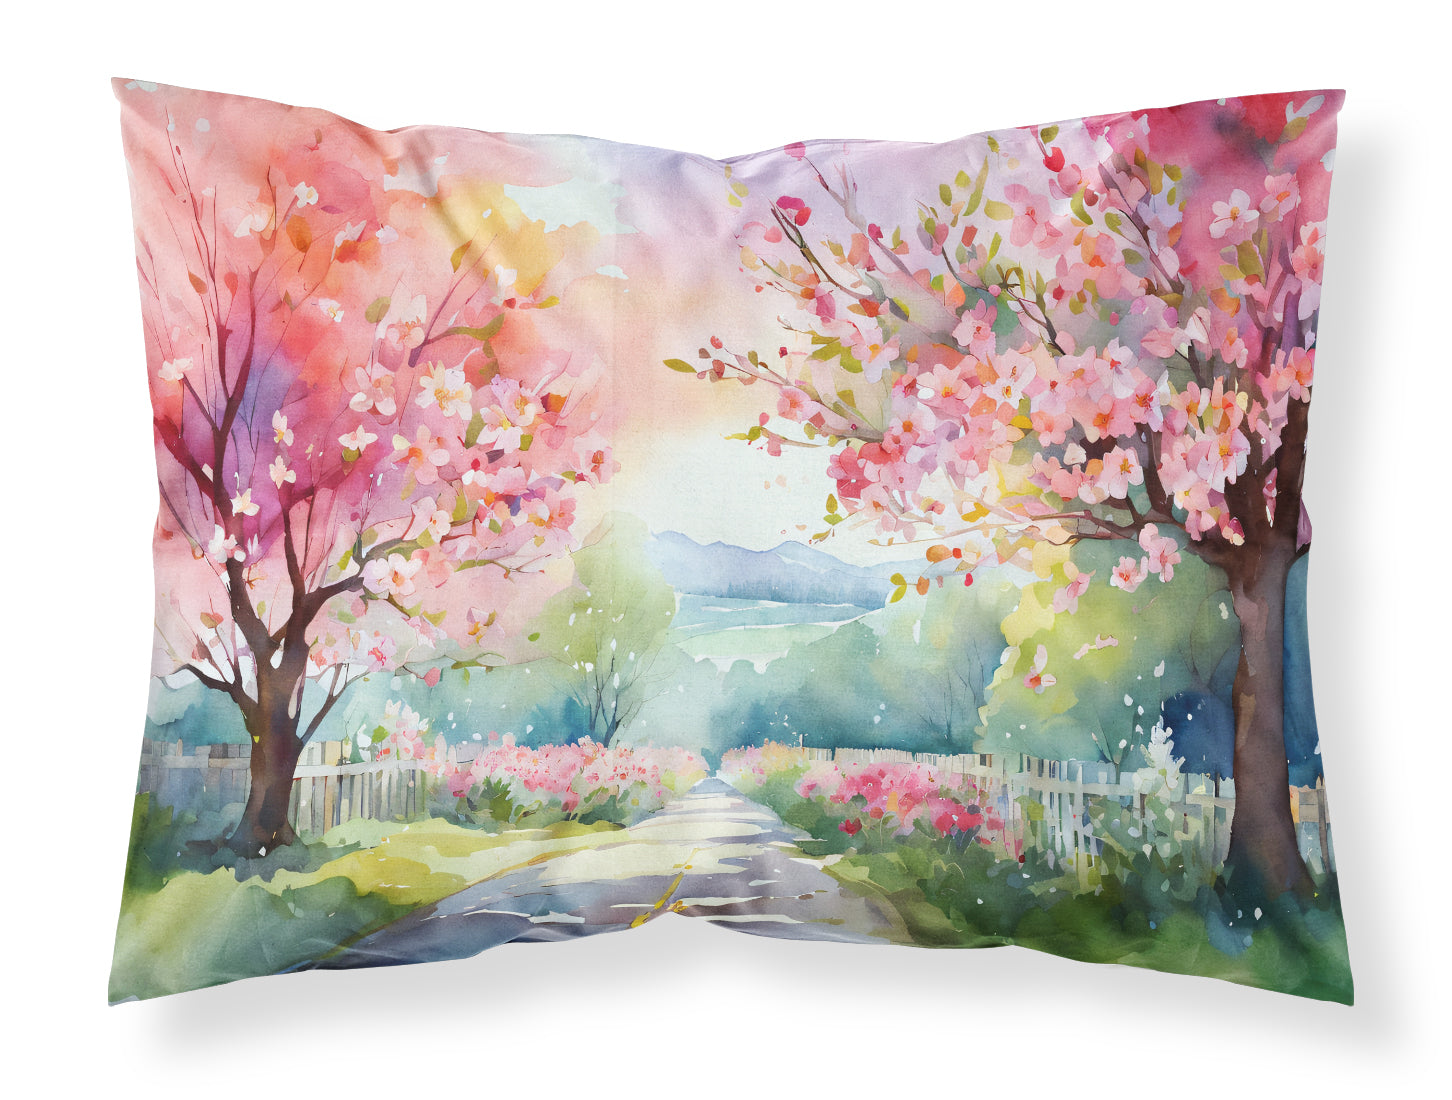 Buy this Michigan Apple Blossoms in Watercolor Fabric Standard Pillowcase